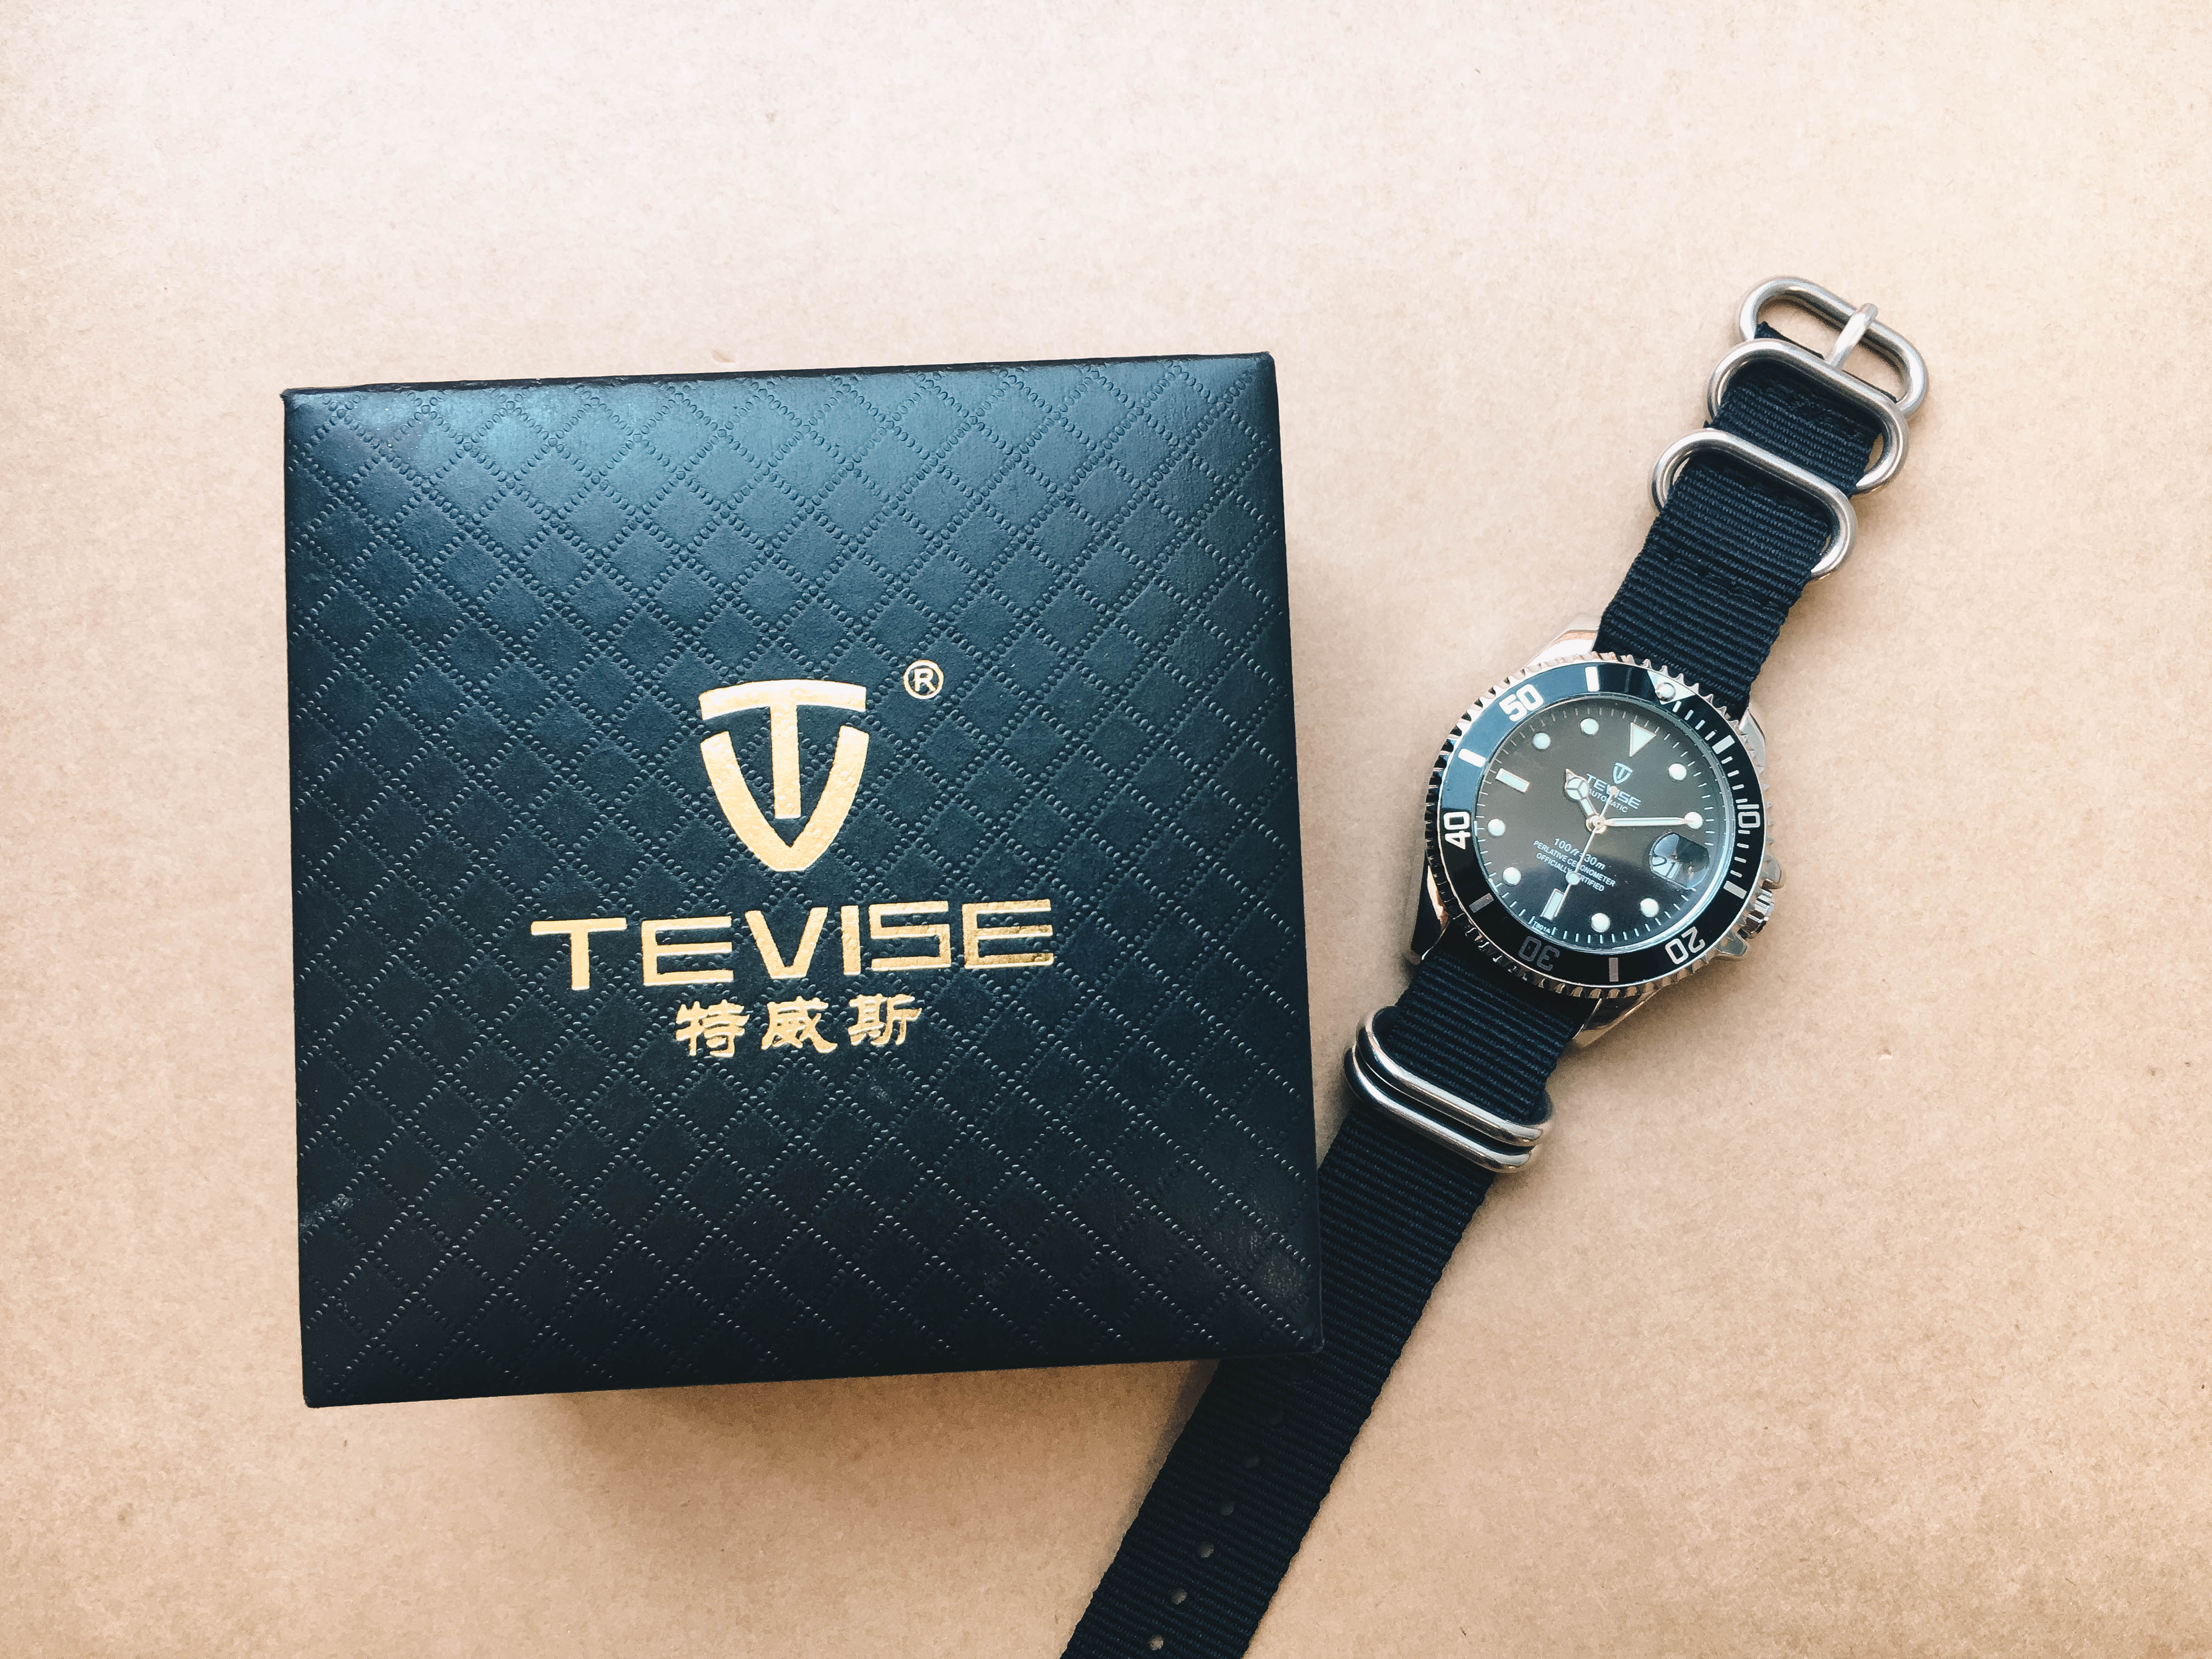 tevise datejust review